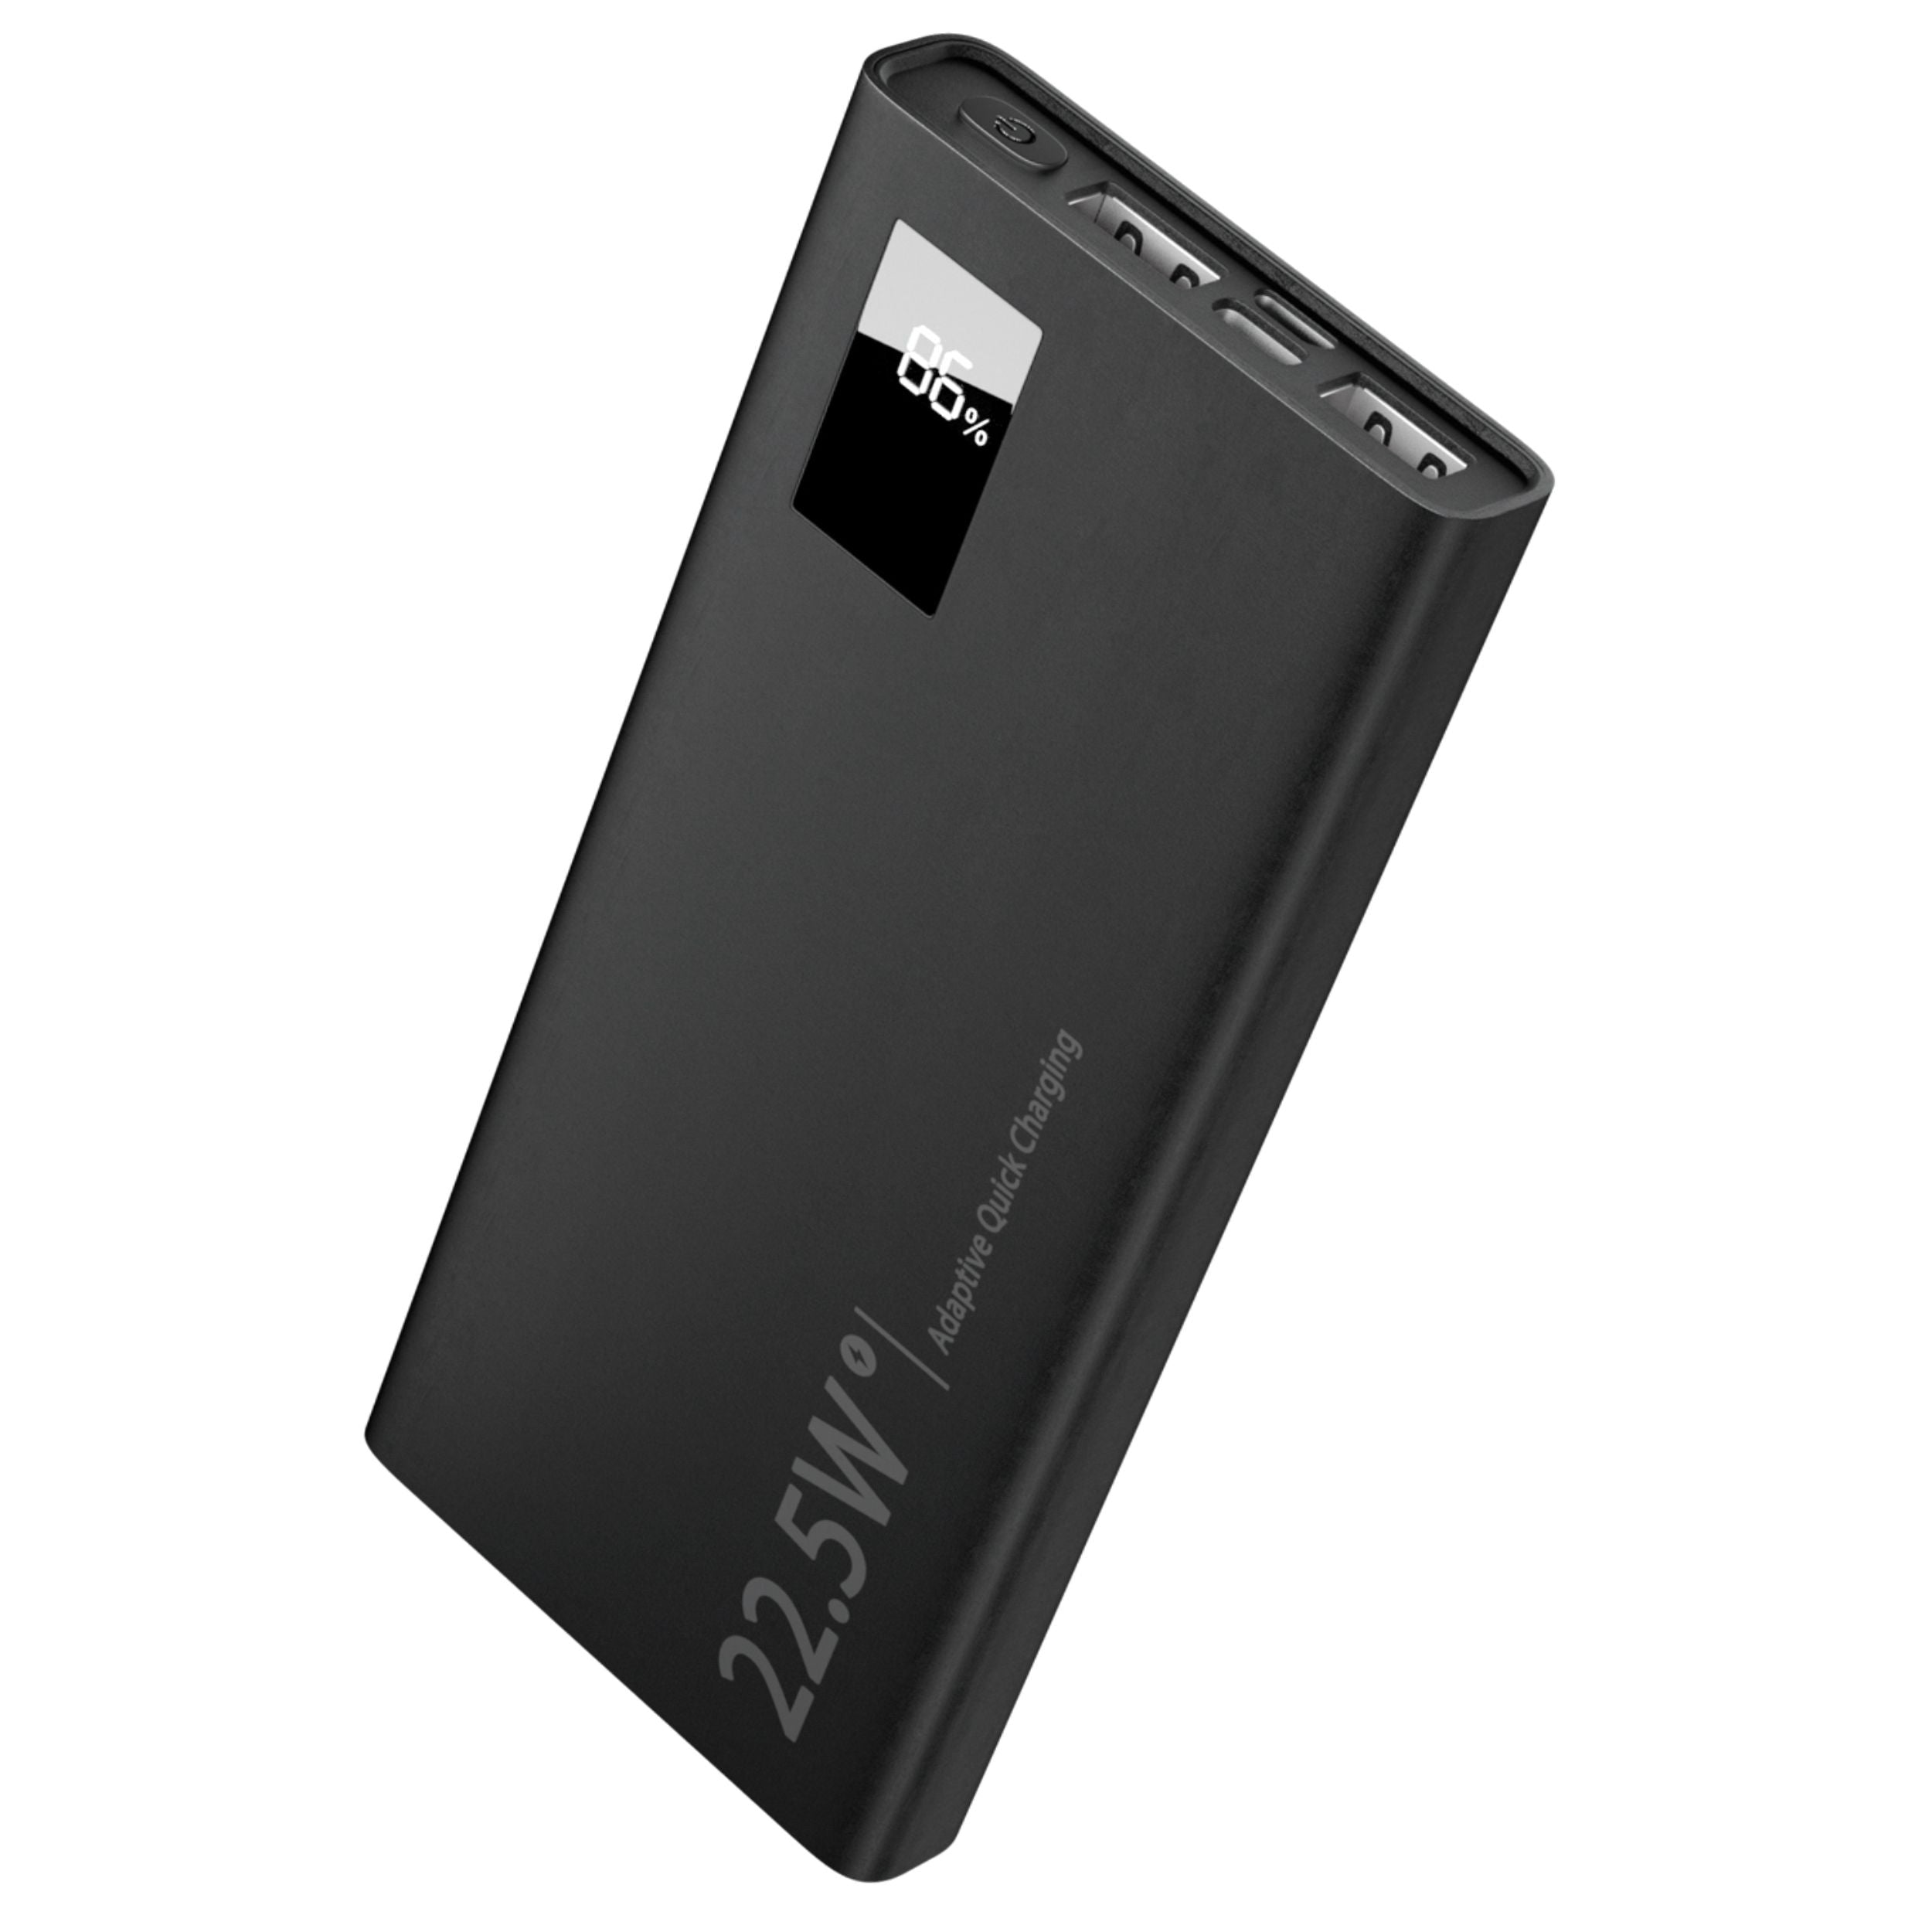 title:10,000mAh Power Bank: Super Fast Charging PD & QC 3.0, LED Display, iPhone & Samsung Compatible;color:Black